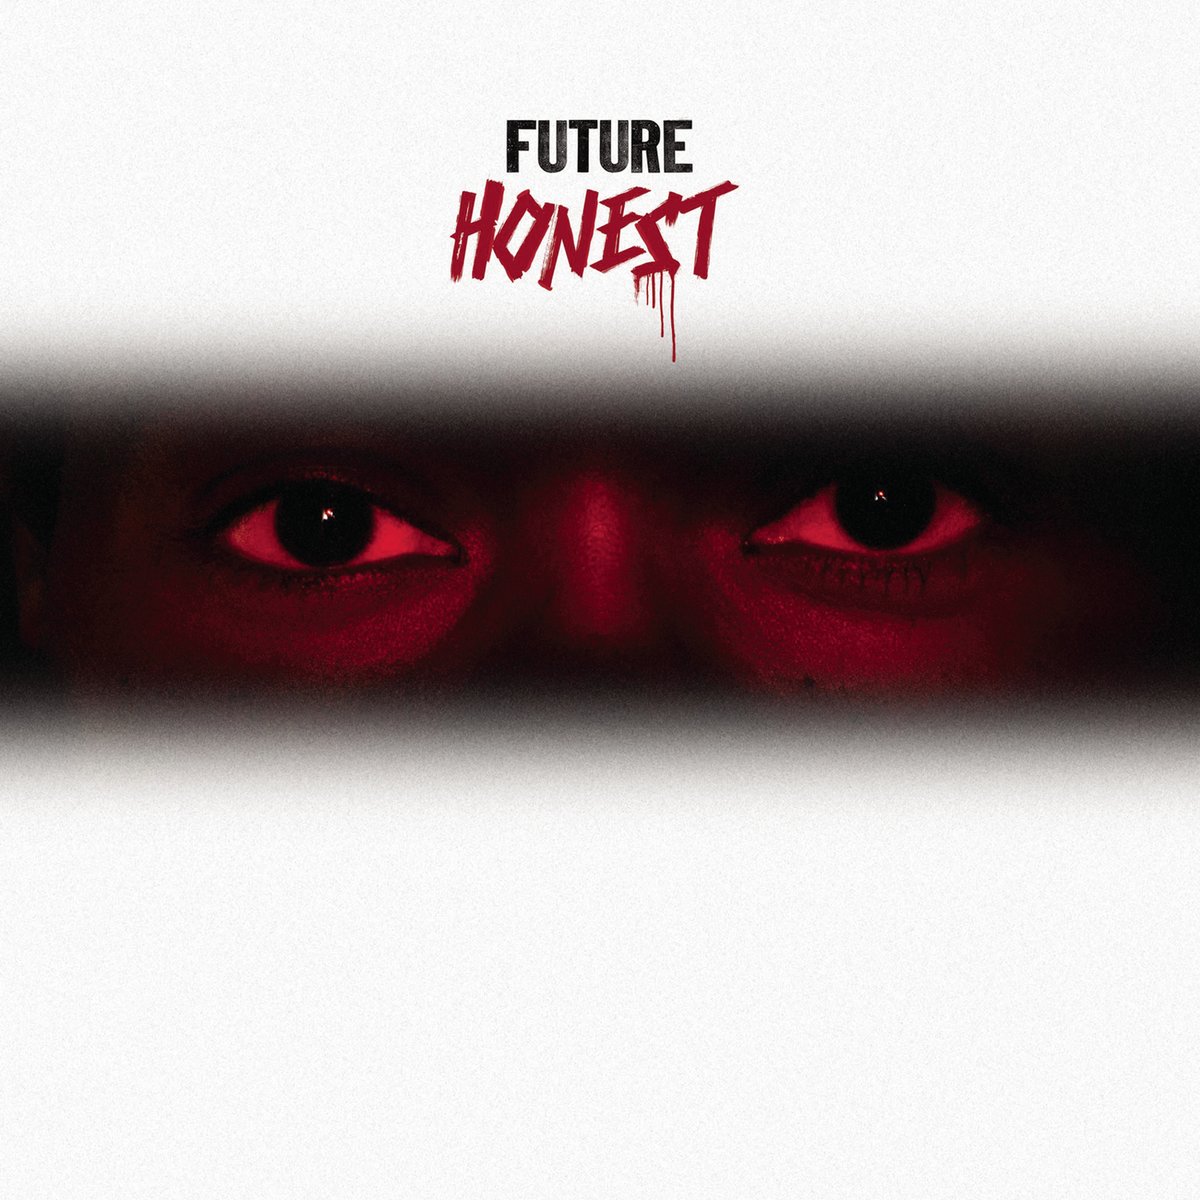 On April 22, 2014, @1future released 'Honest.' He incorporated trap, R&B, and pop elements that meshed with his unique flows. It paved the way for his decade-long dominance in hip-hop. 10 years later and 10 number 1 albums later, Future's still honest. tidal.link/3xpc8El